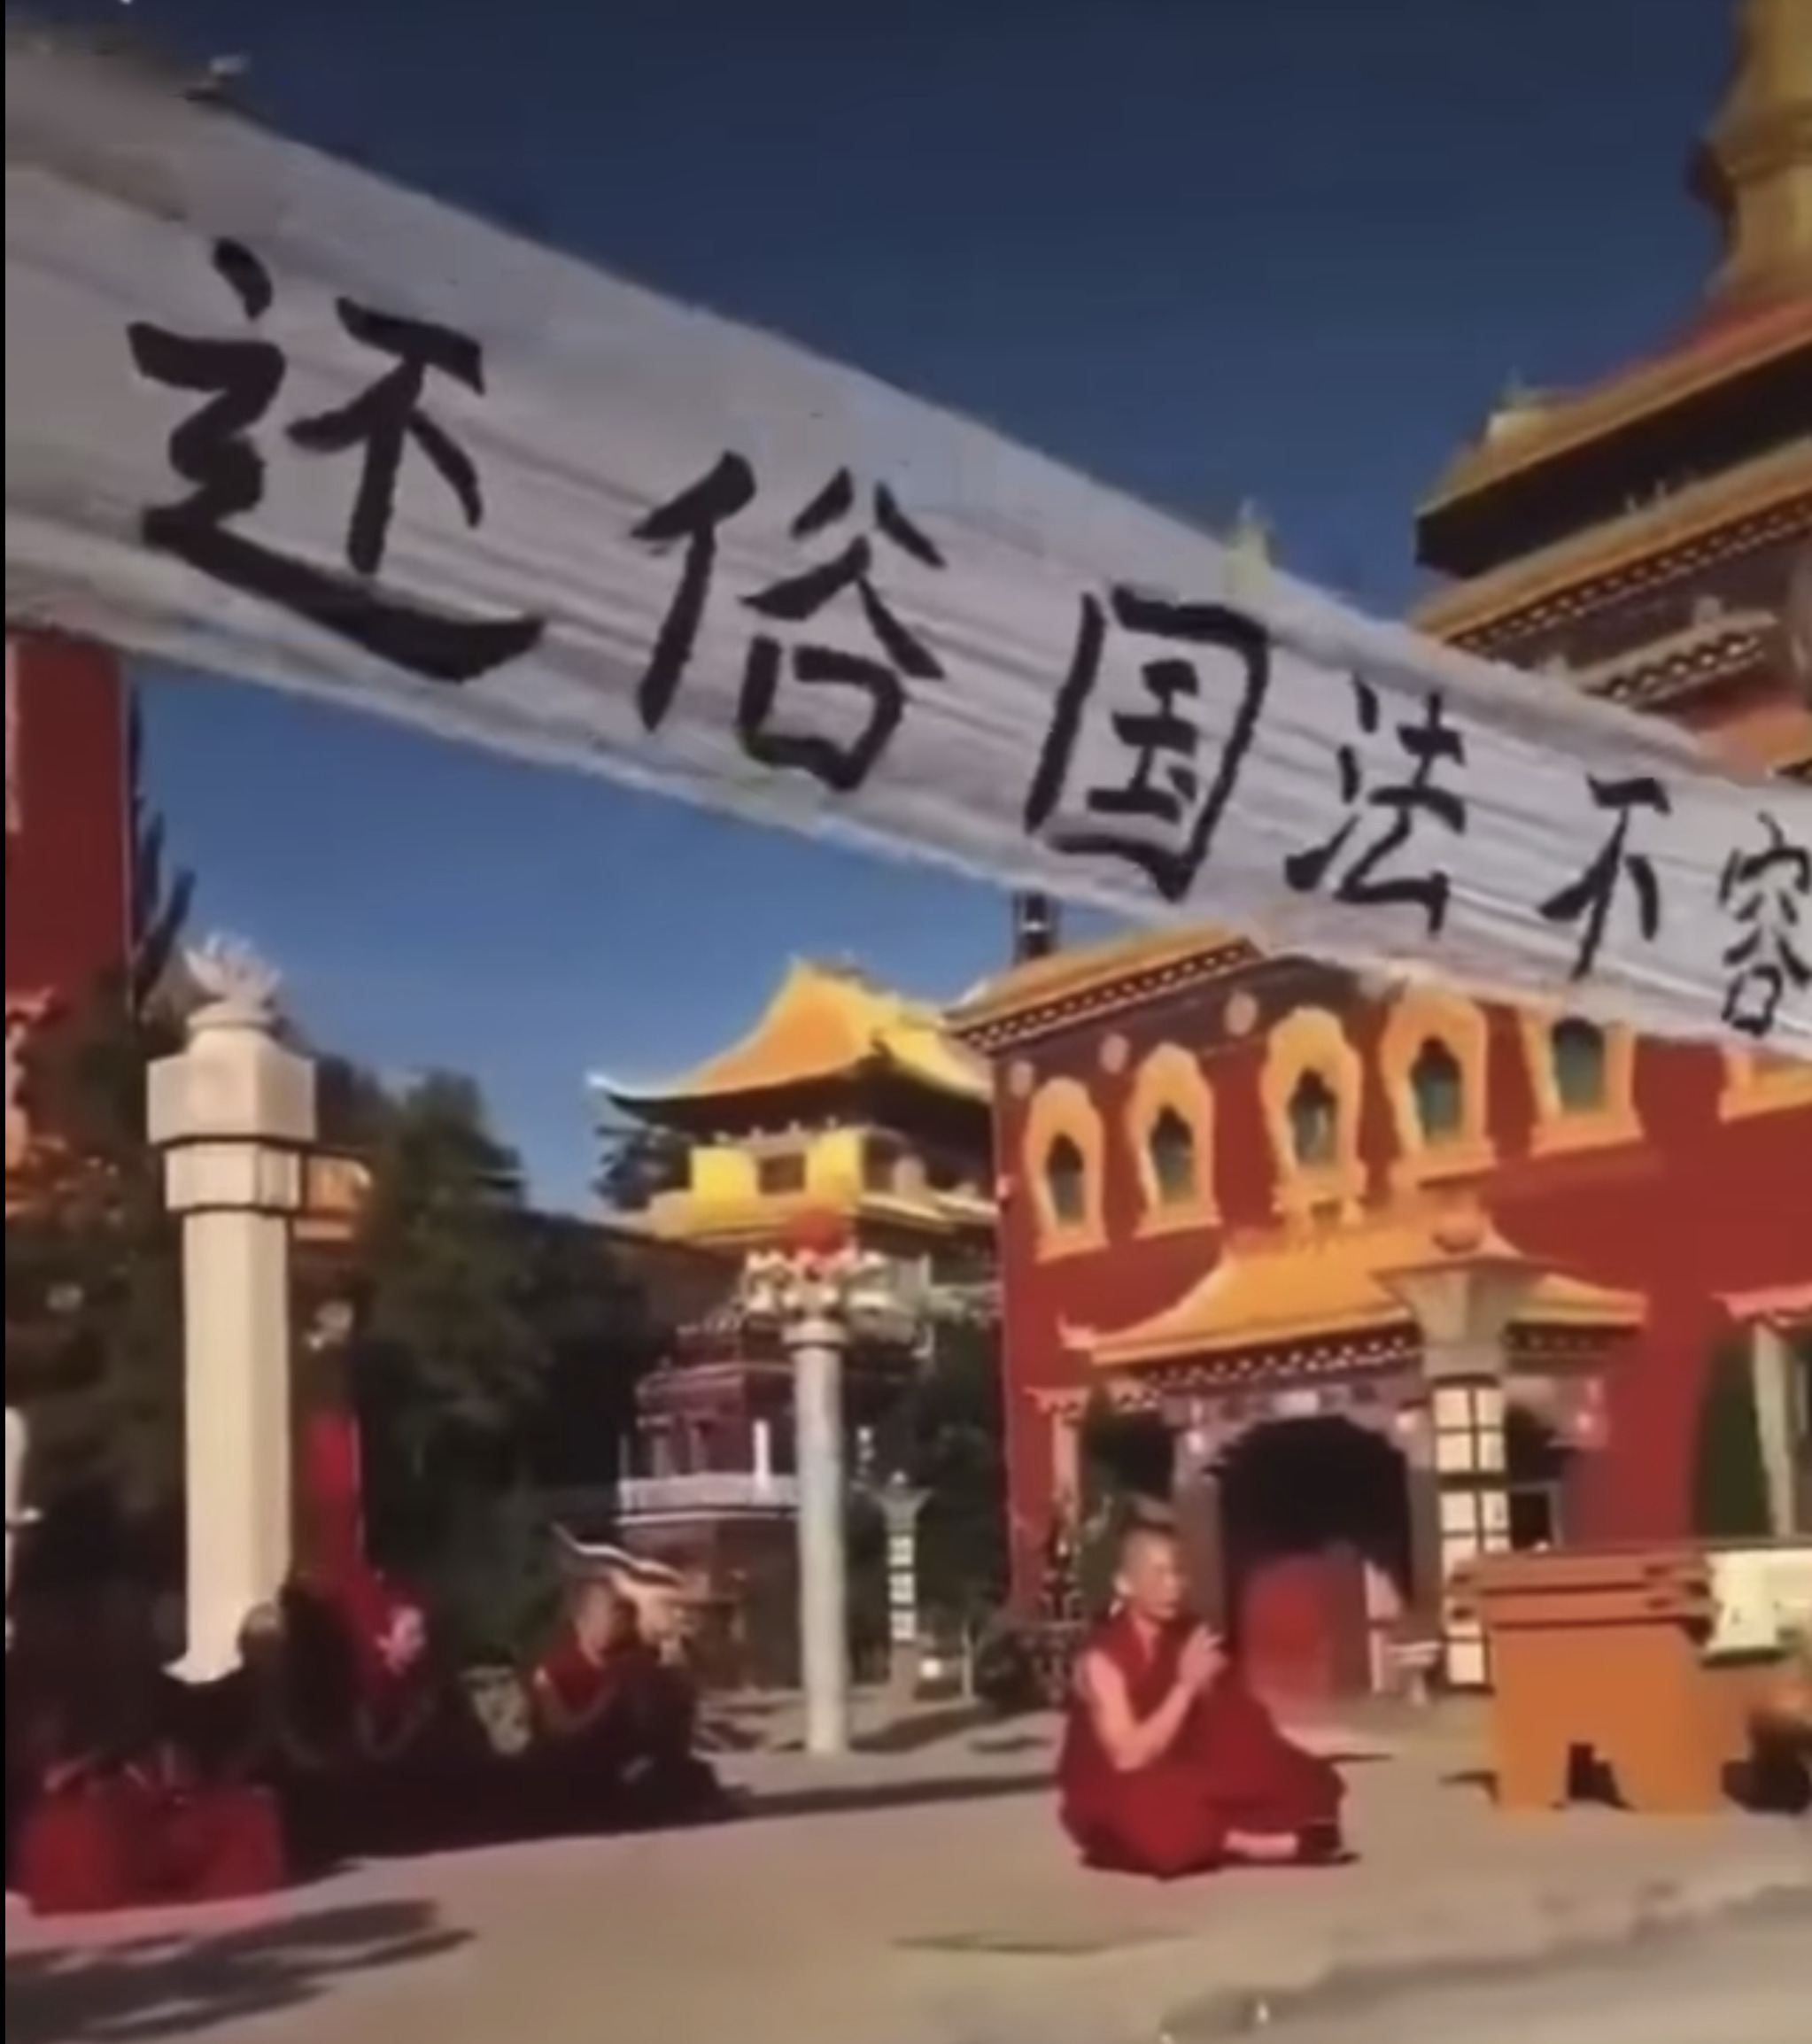 Monks and Nuns staged a sit-in protest agains the forced eviction by local Chinese authorities. 